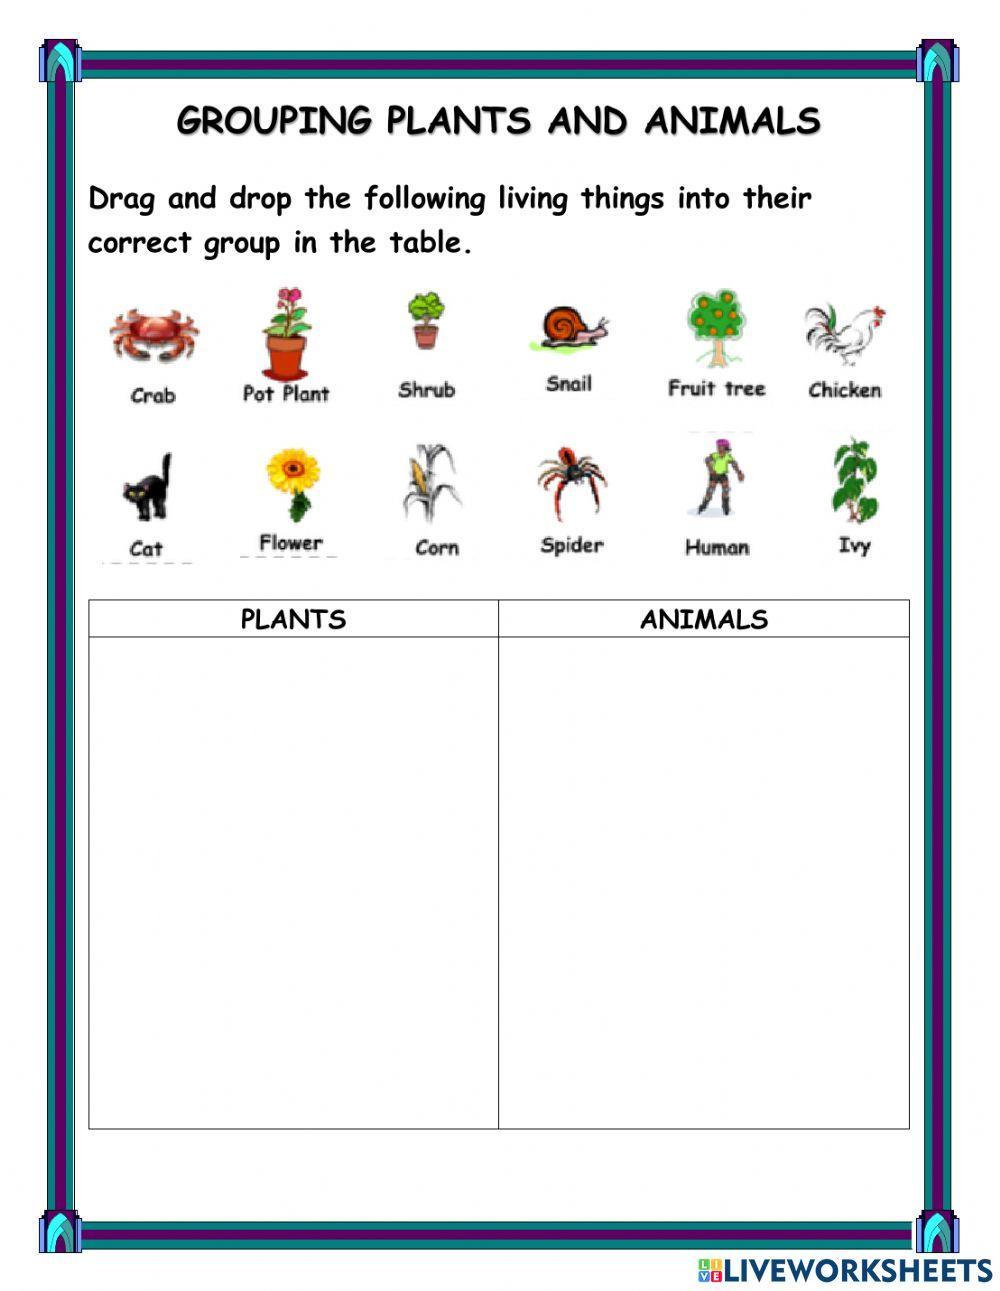 Living Things - Plants and Animals